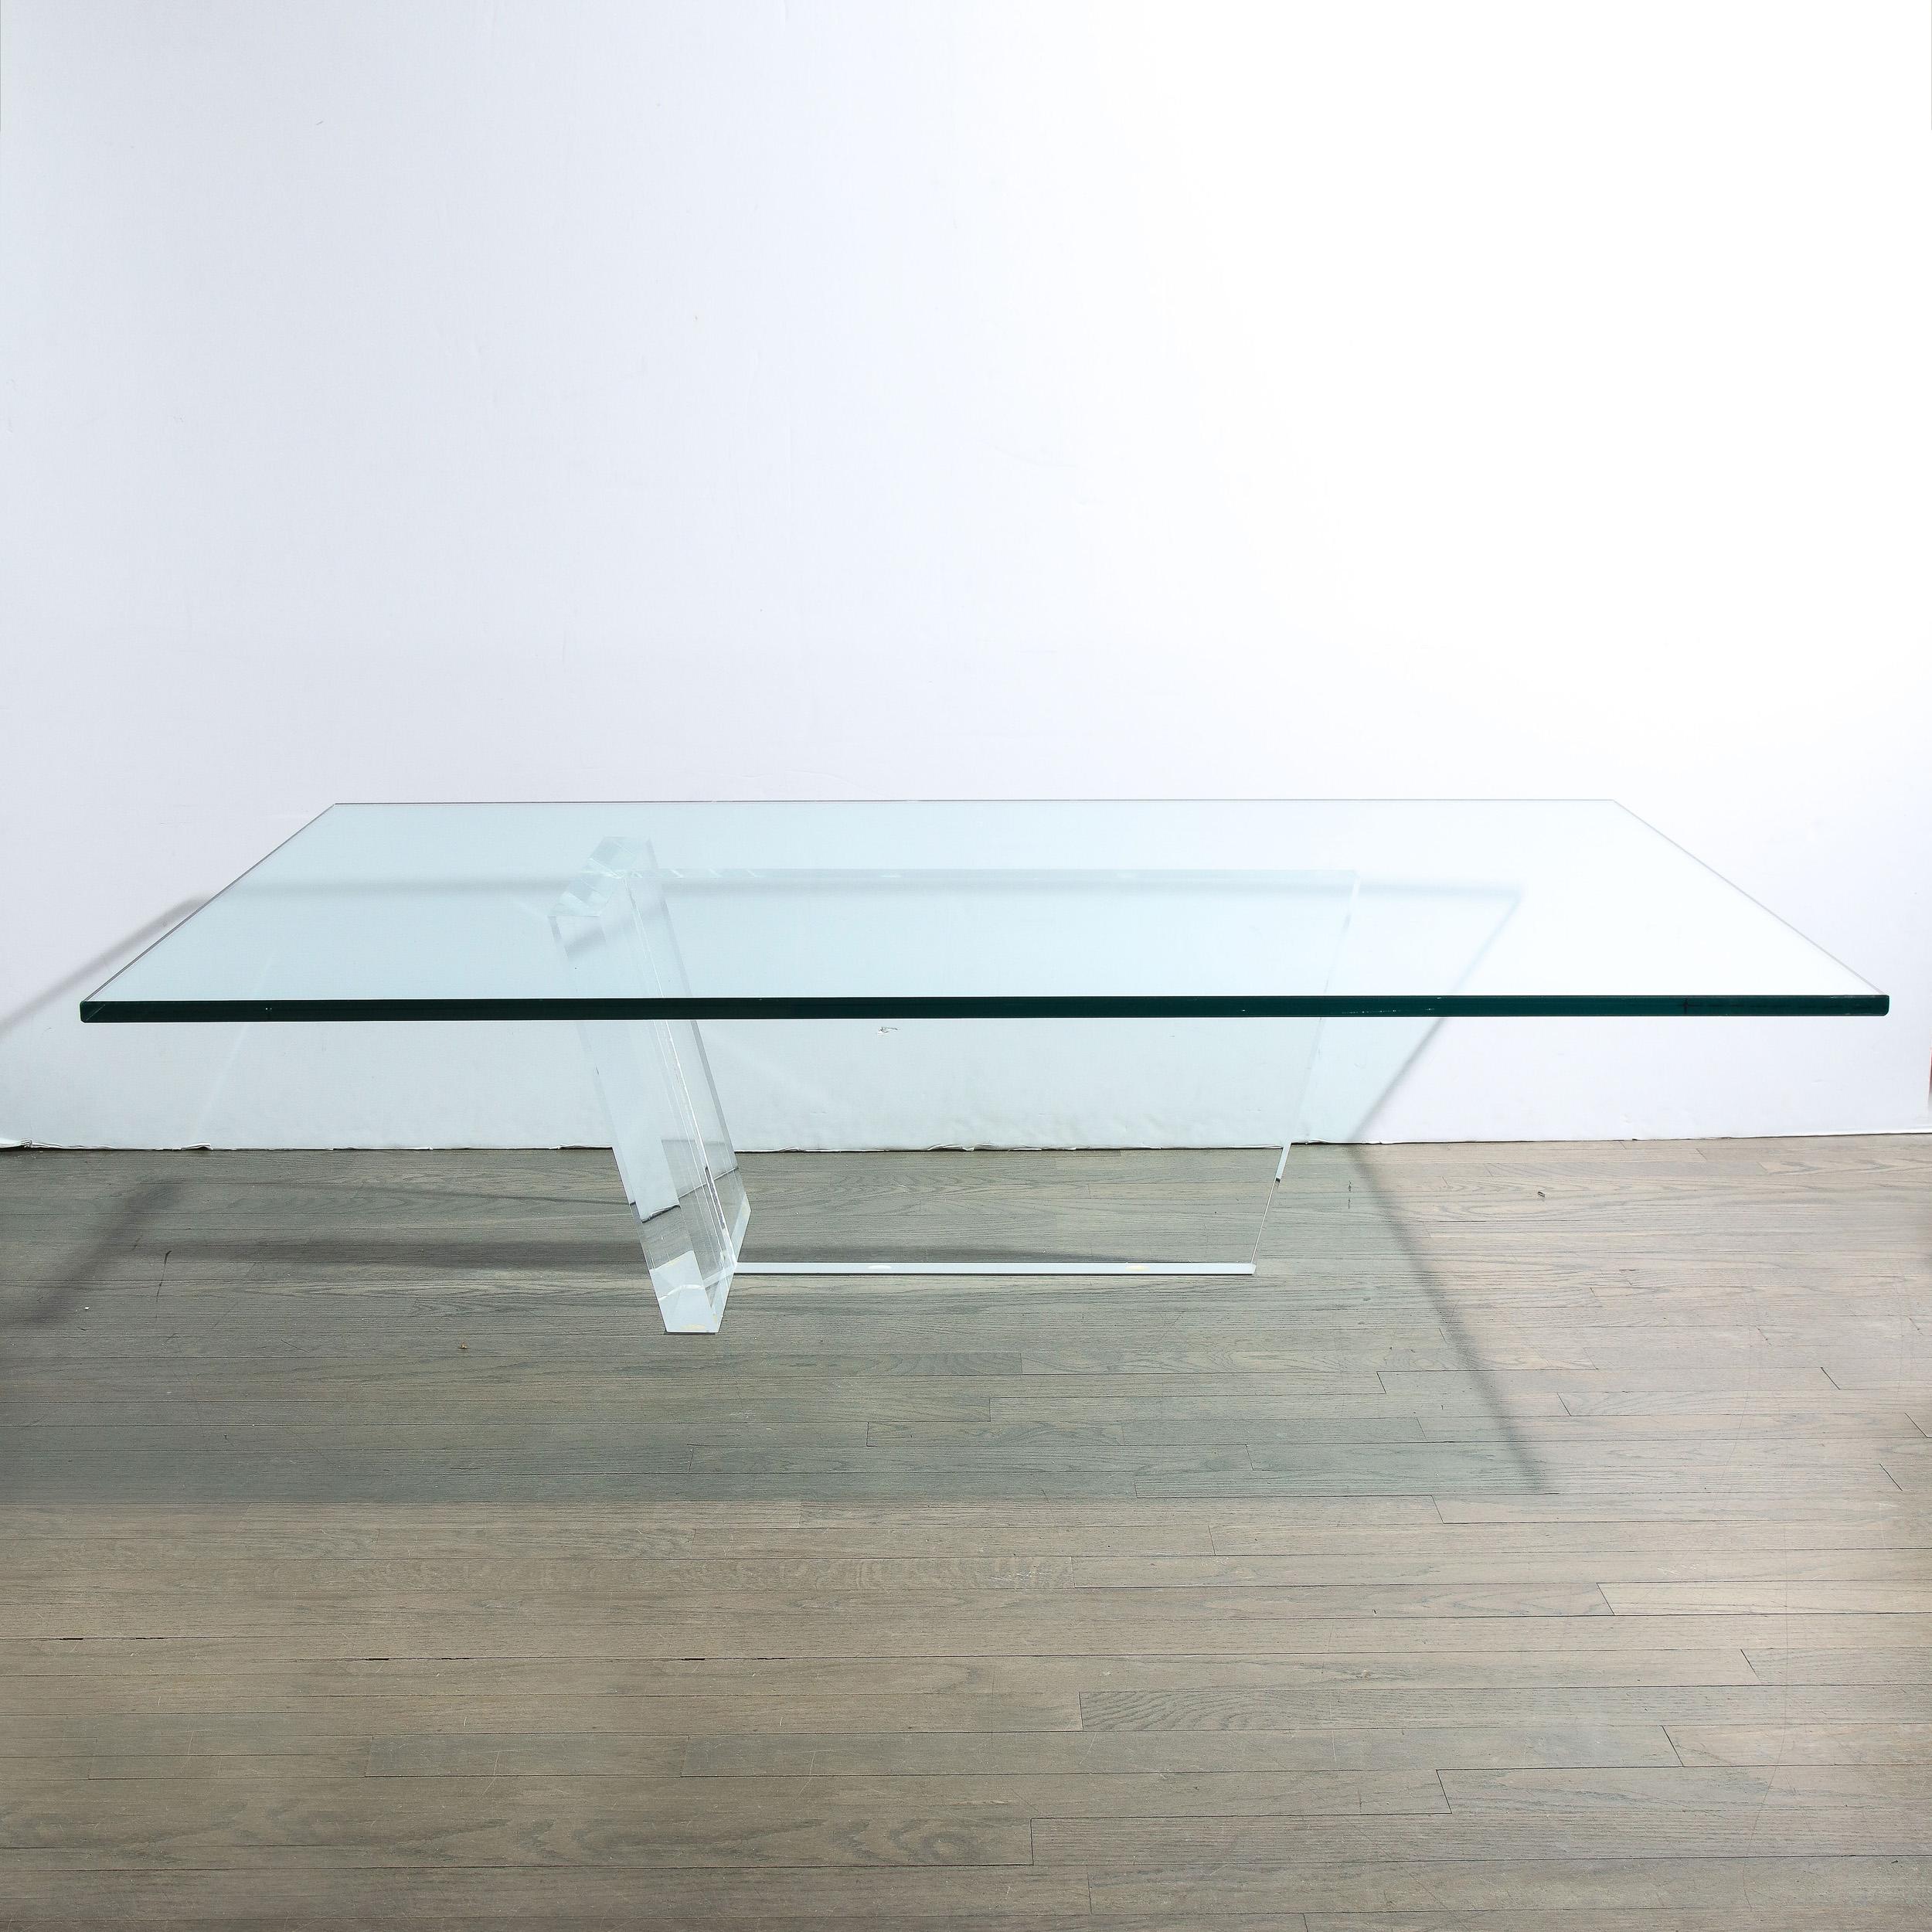 This refined Minimalist Mid-Century Modern cocktail table was realized in the United States circa 1970. It offers a trapezoidal central form in translucent Lucite with angled sides that is adjoined on one side at a right angle by another rhombus